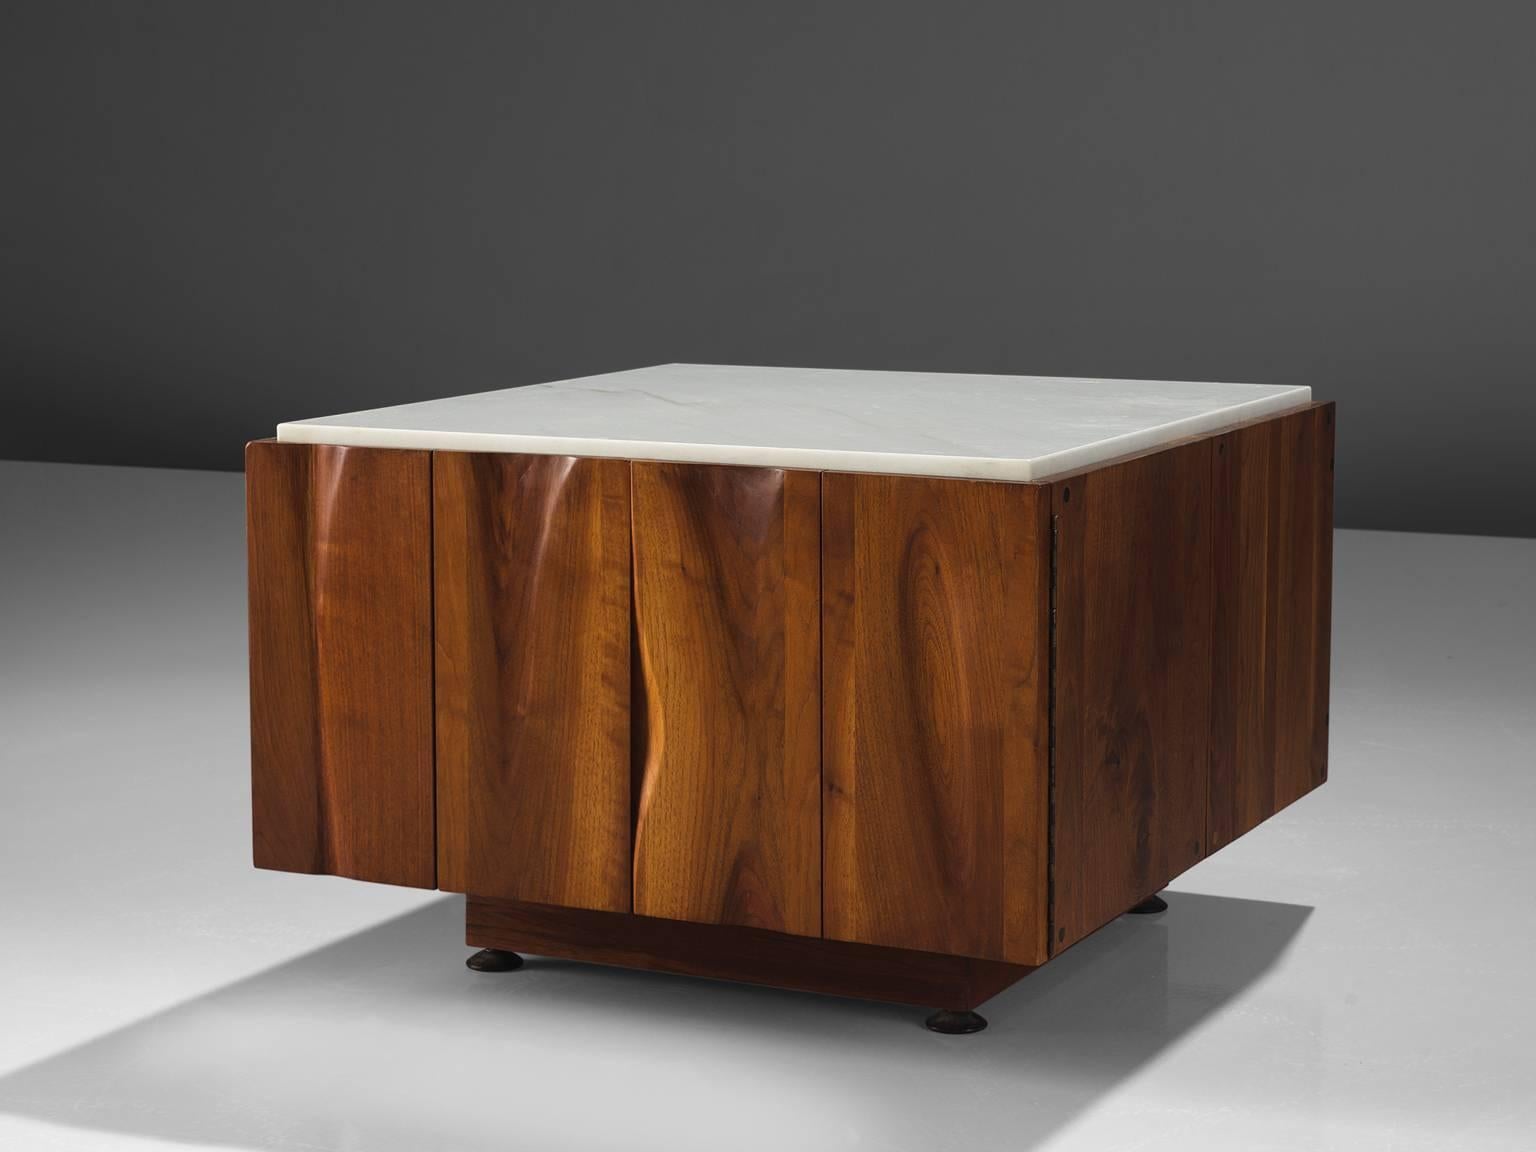 Phillip Lloyd Powell, coffee table, walnut and marble, New Hope, PA, 1962.

This exquisite coffee table is designed by Phillip Lloyd Powell and executed out of solid walnut and white marble as a top that balances the warm walnut perfectly. The